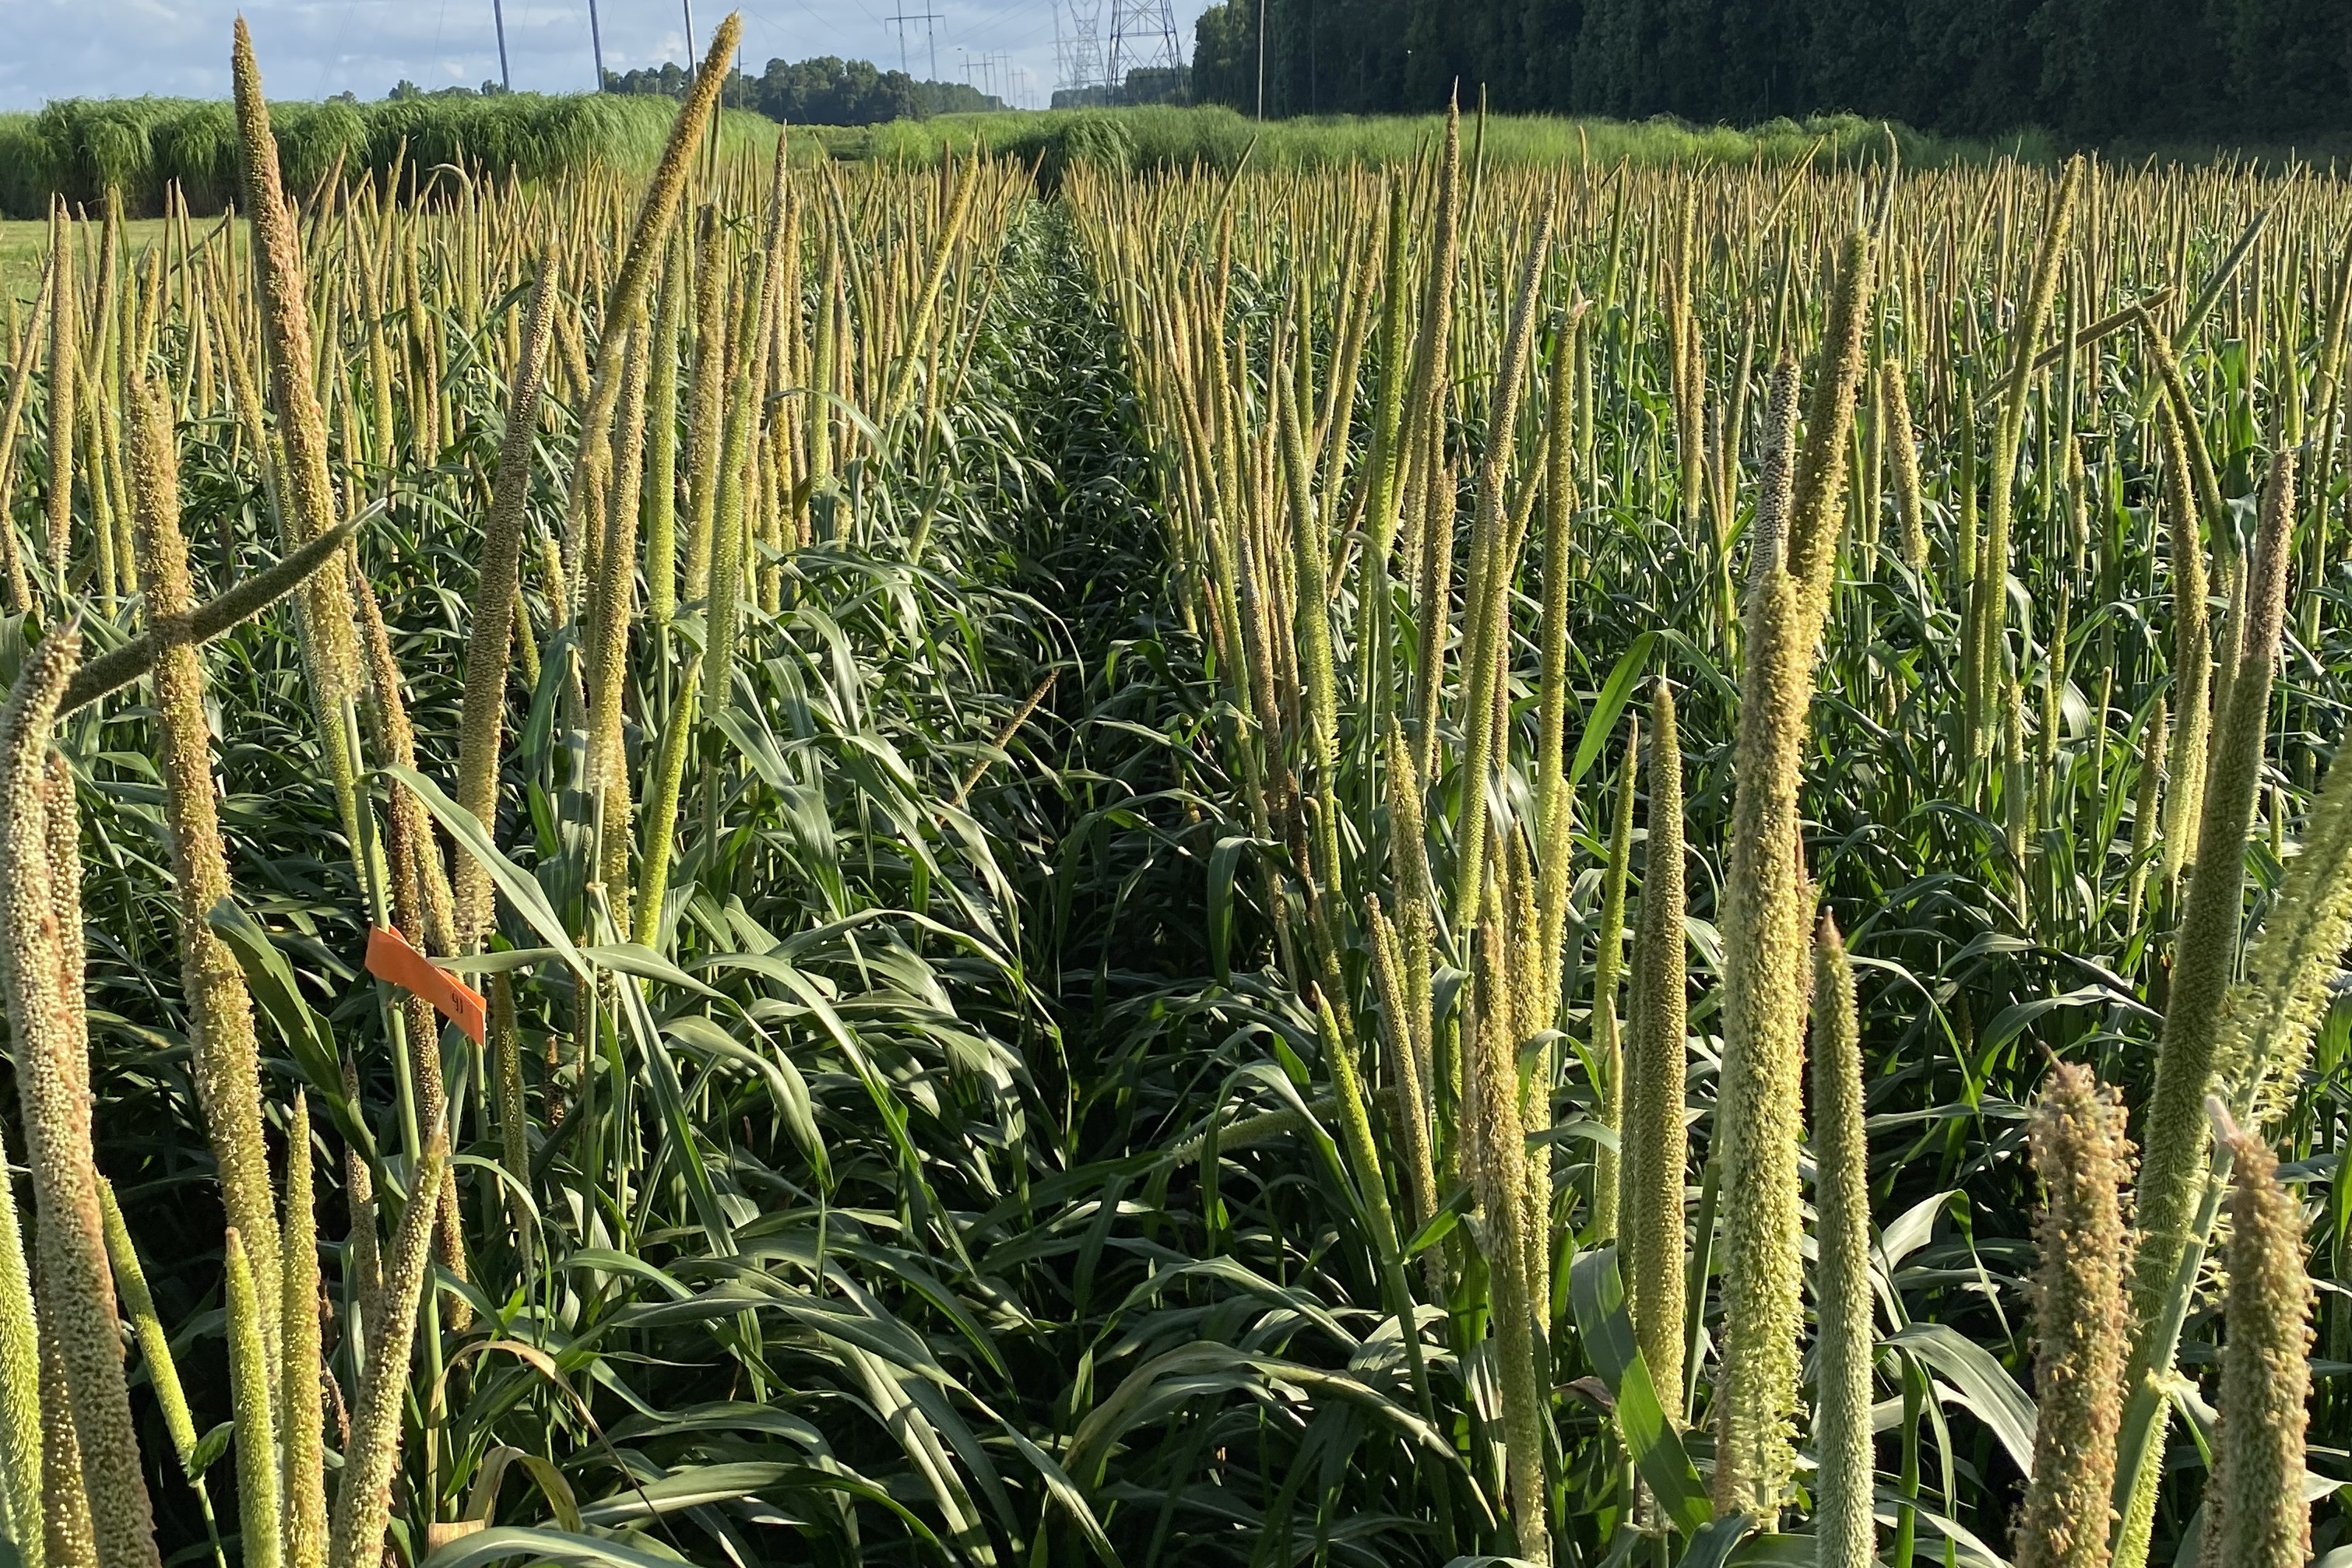 A new study from the USDA Agricultural Research Service and UGA College of Agricultural and Environmental Sciences has found that pearl millet, an annual grass suited for conditions in the Southeast U.S., is a good food source for some pollinators.